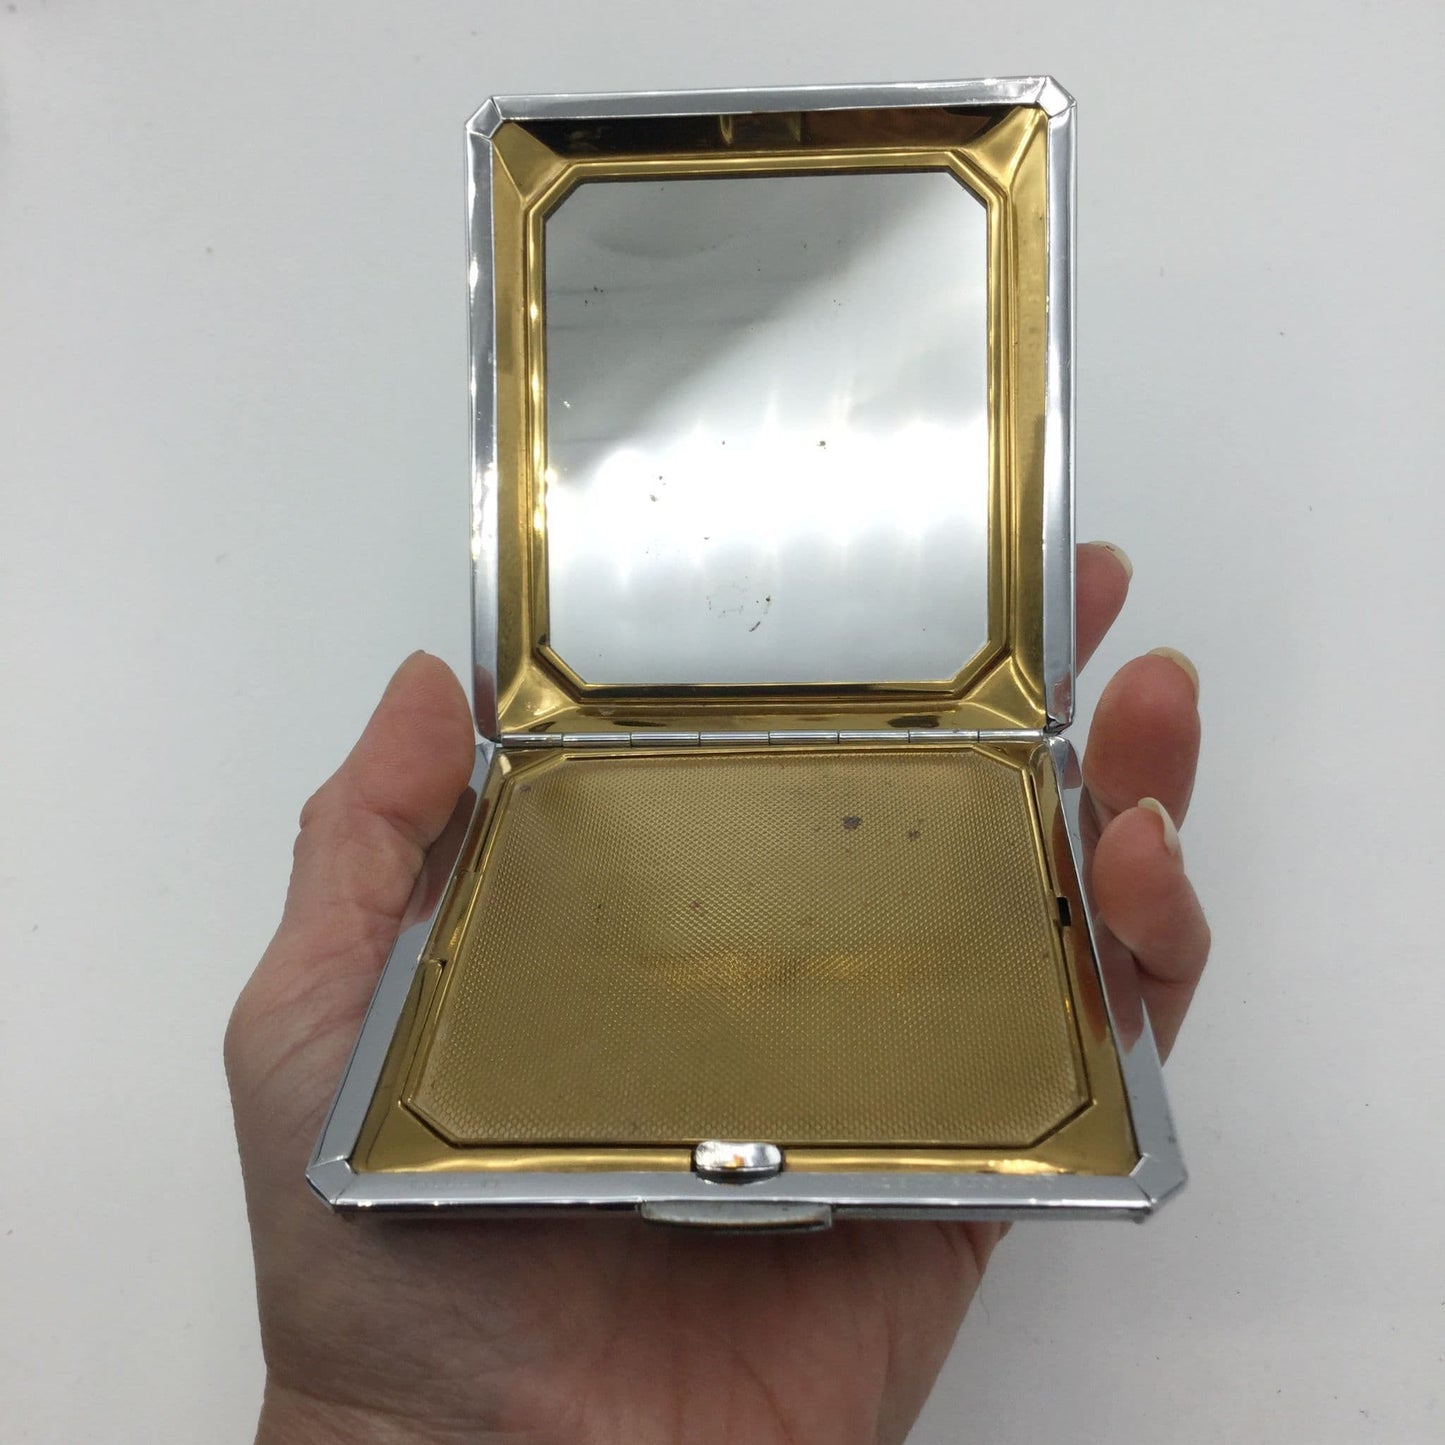 gold interior to compact showing the mirror